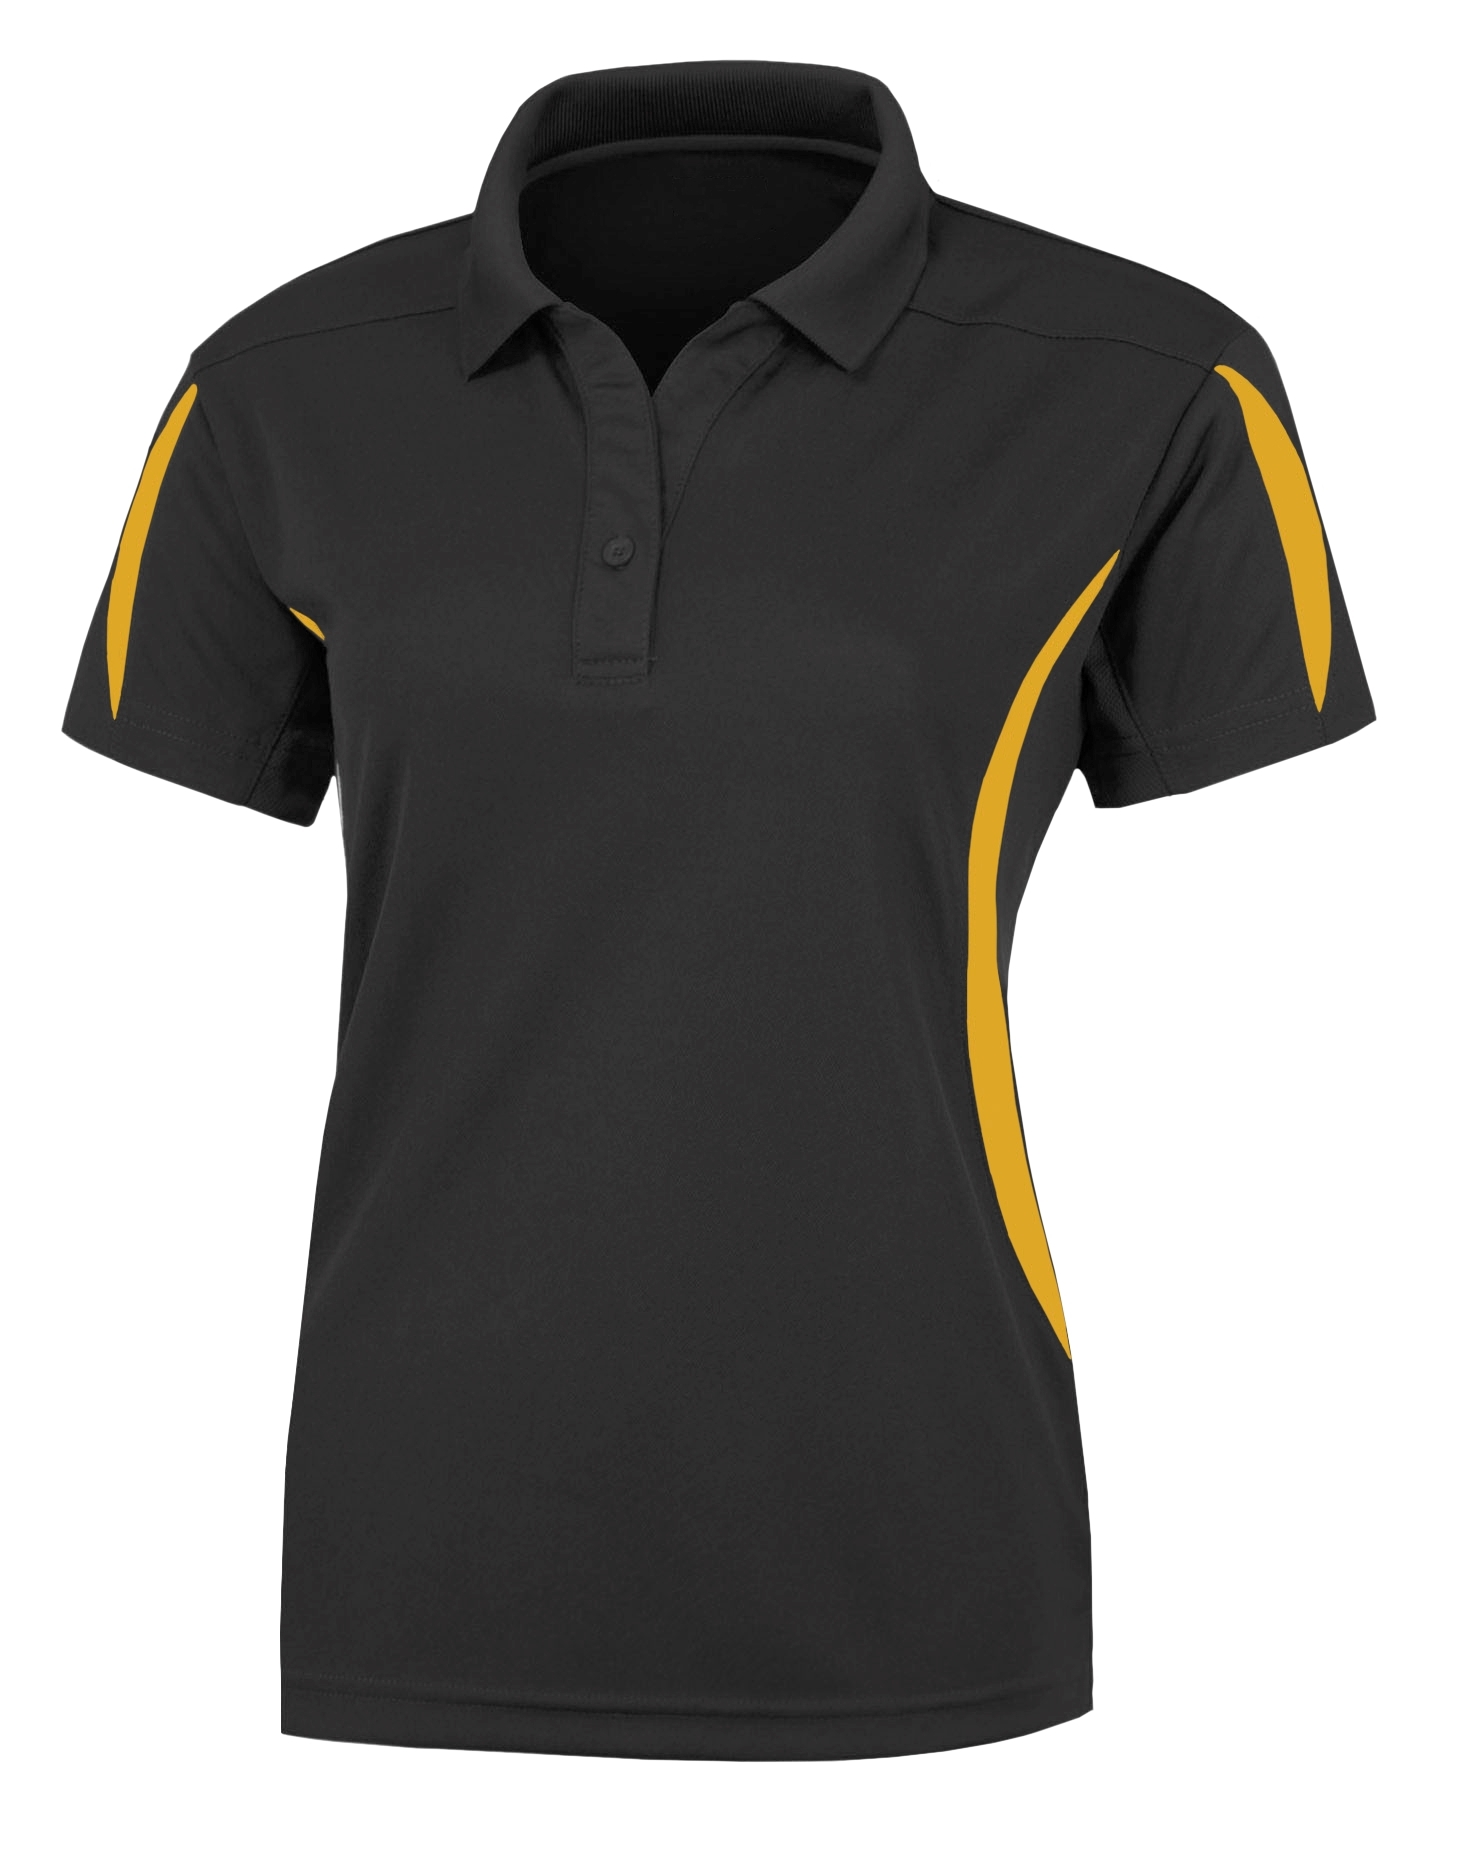 BAW Athletic Wear CT771L - Ladies Crescent Cool-Tek Polo